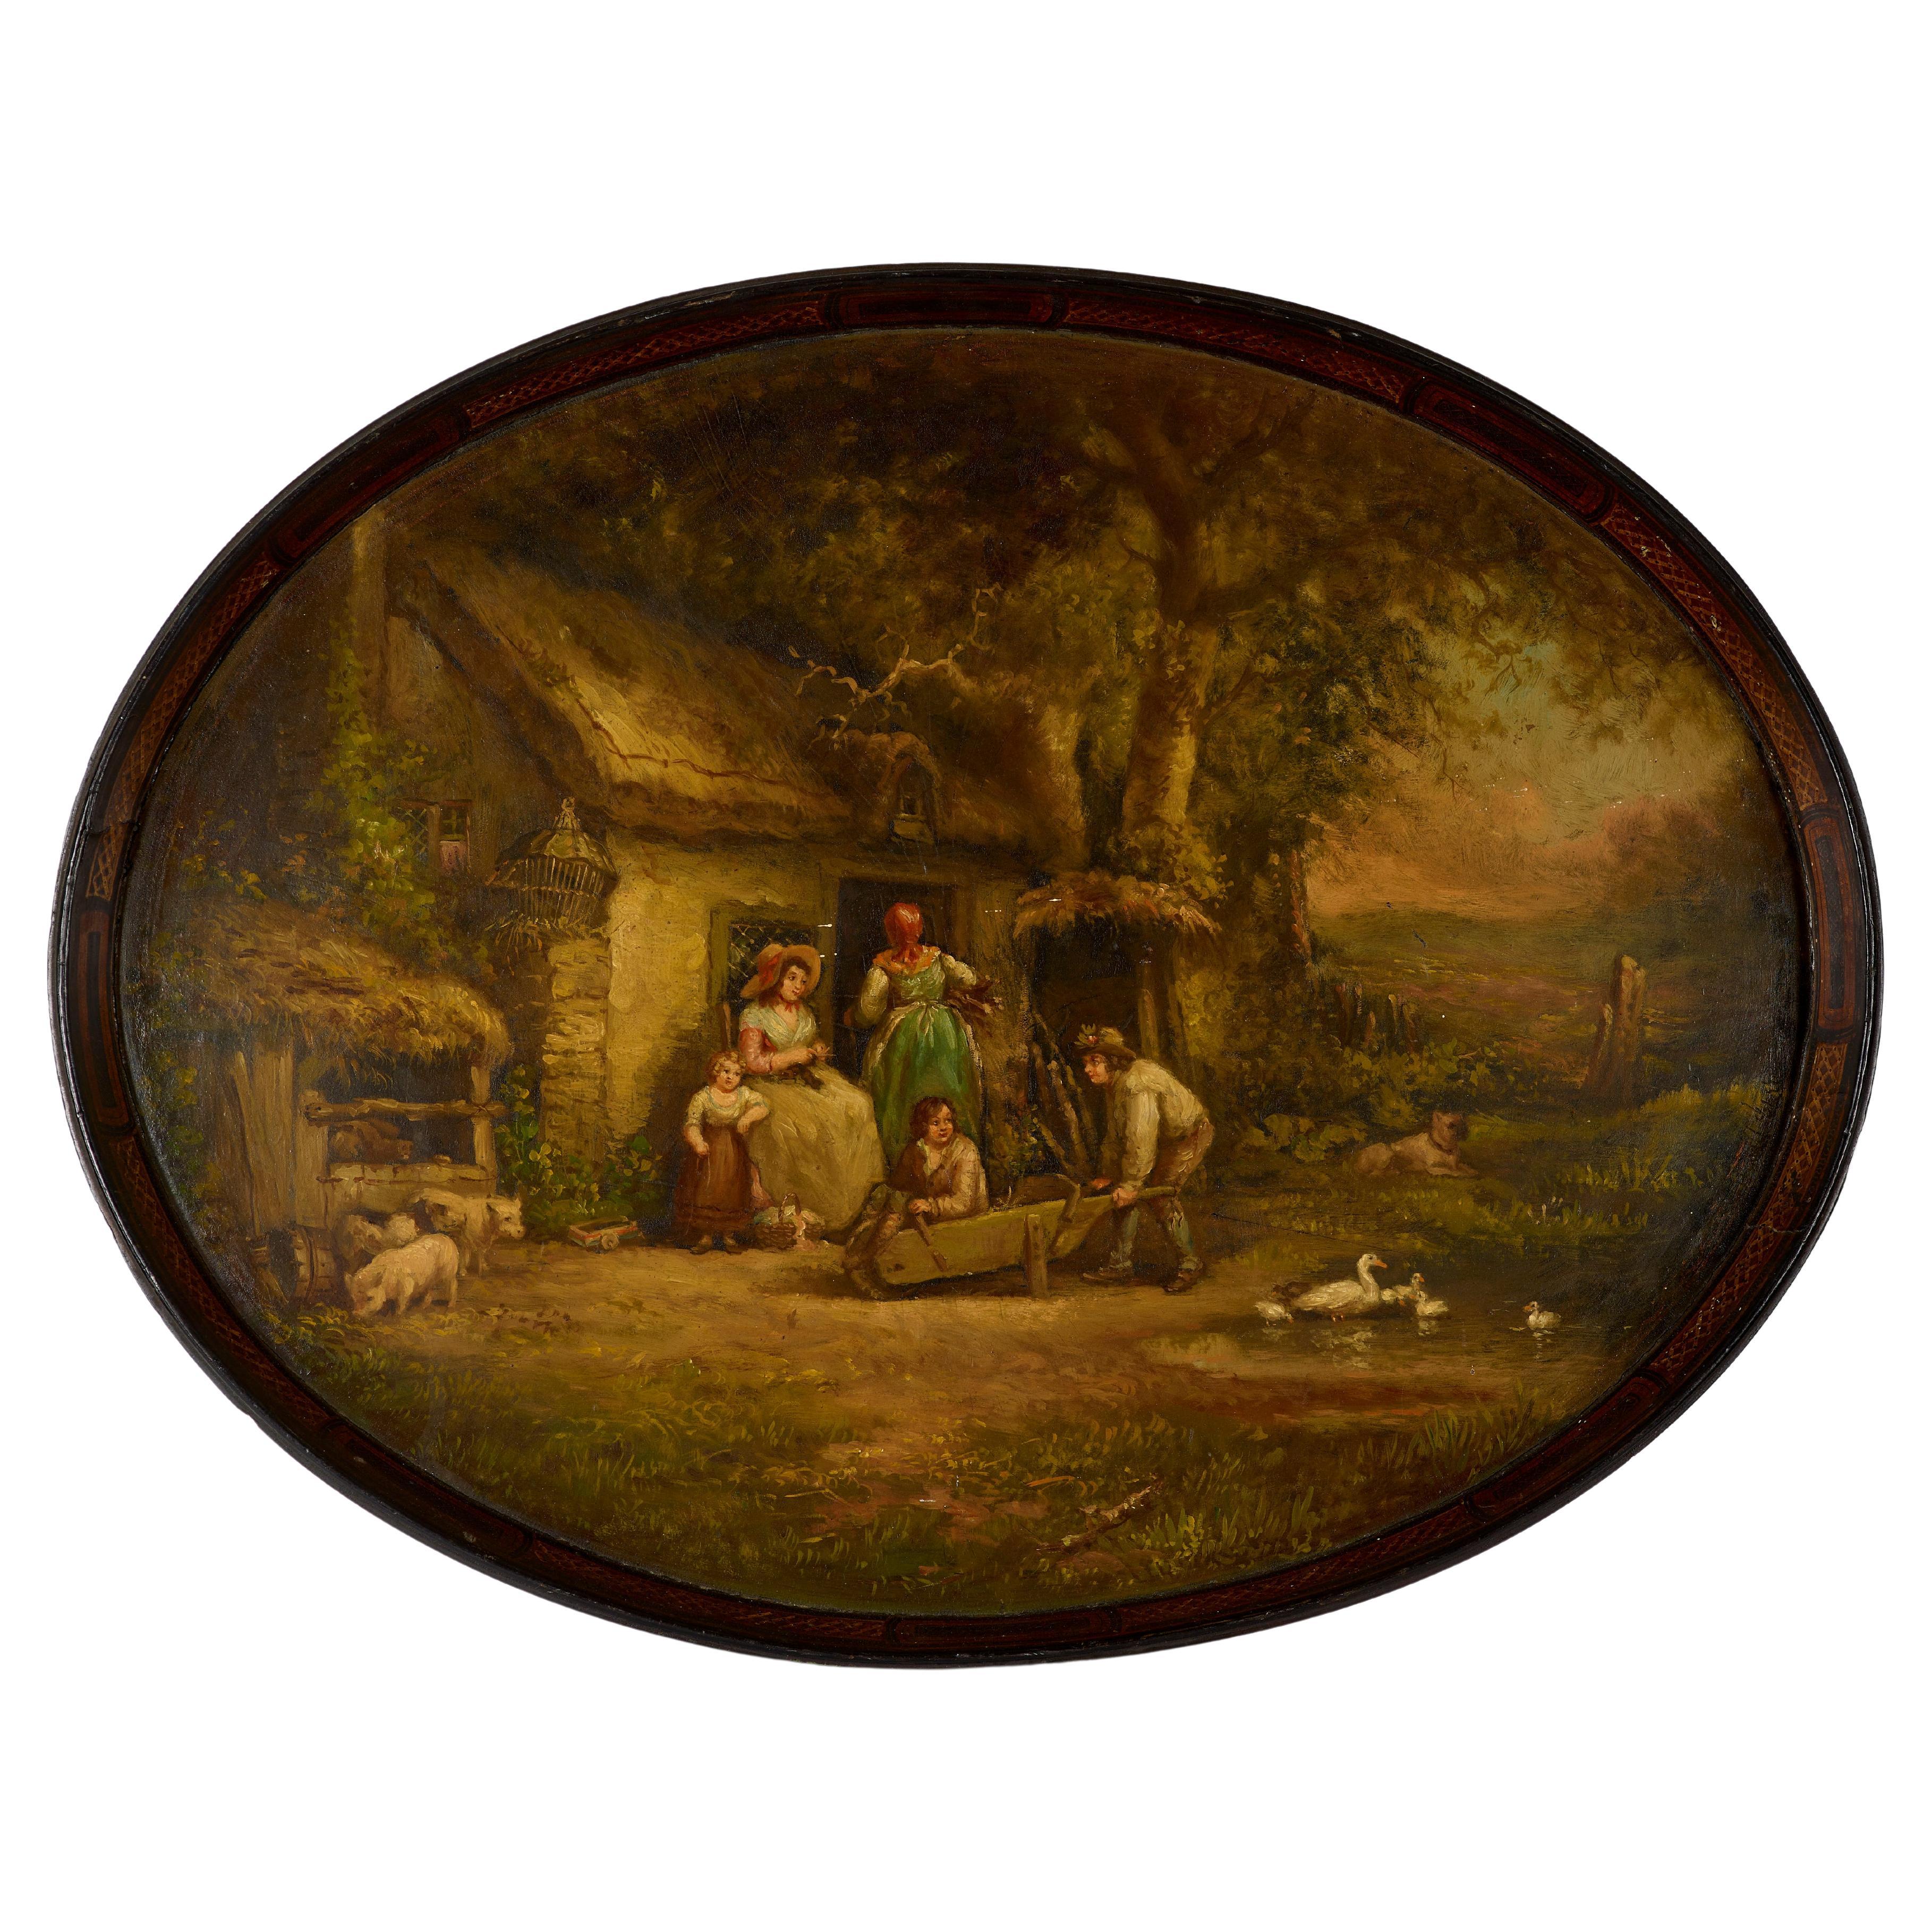 Painted tray showing rural scene Marked Wontner and C Benson London